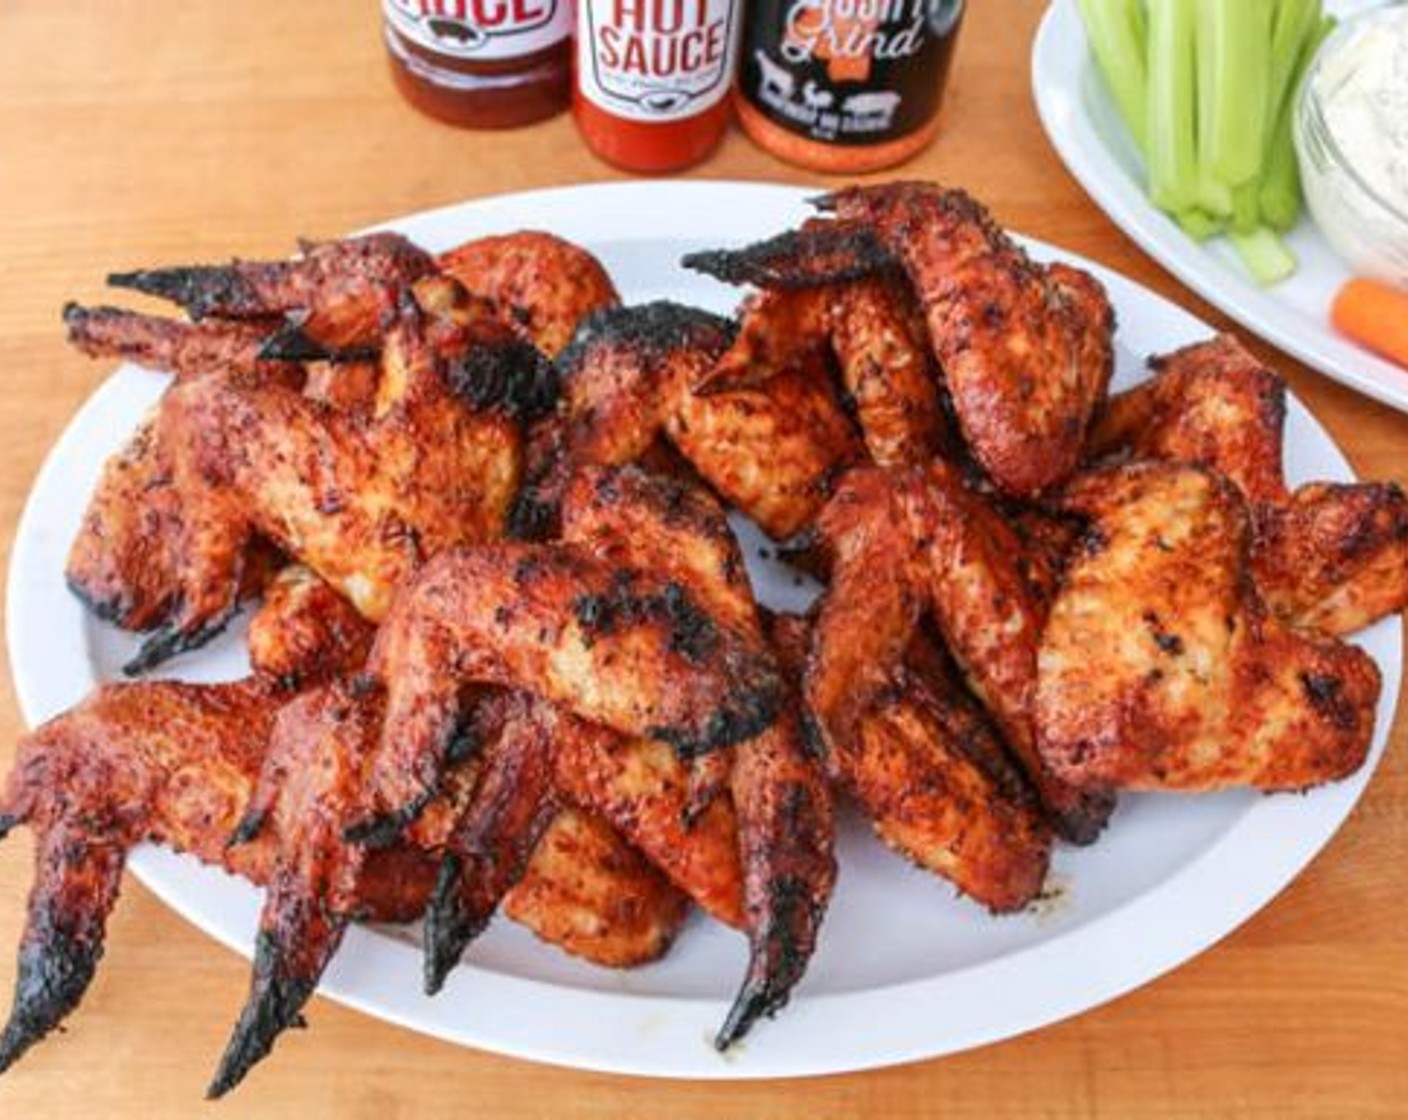 step 7 Toss the grilled wings in the sauce in batches (3-4 wings at a time). Serve and enjoy wings with your favorite dipping sauce, celery and carrot sticks.